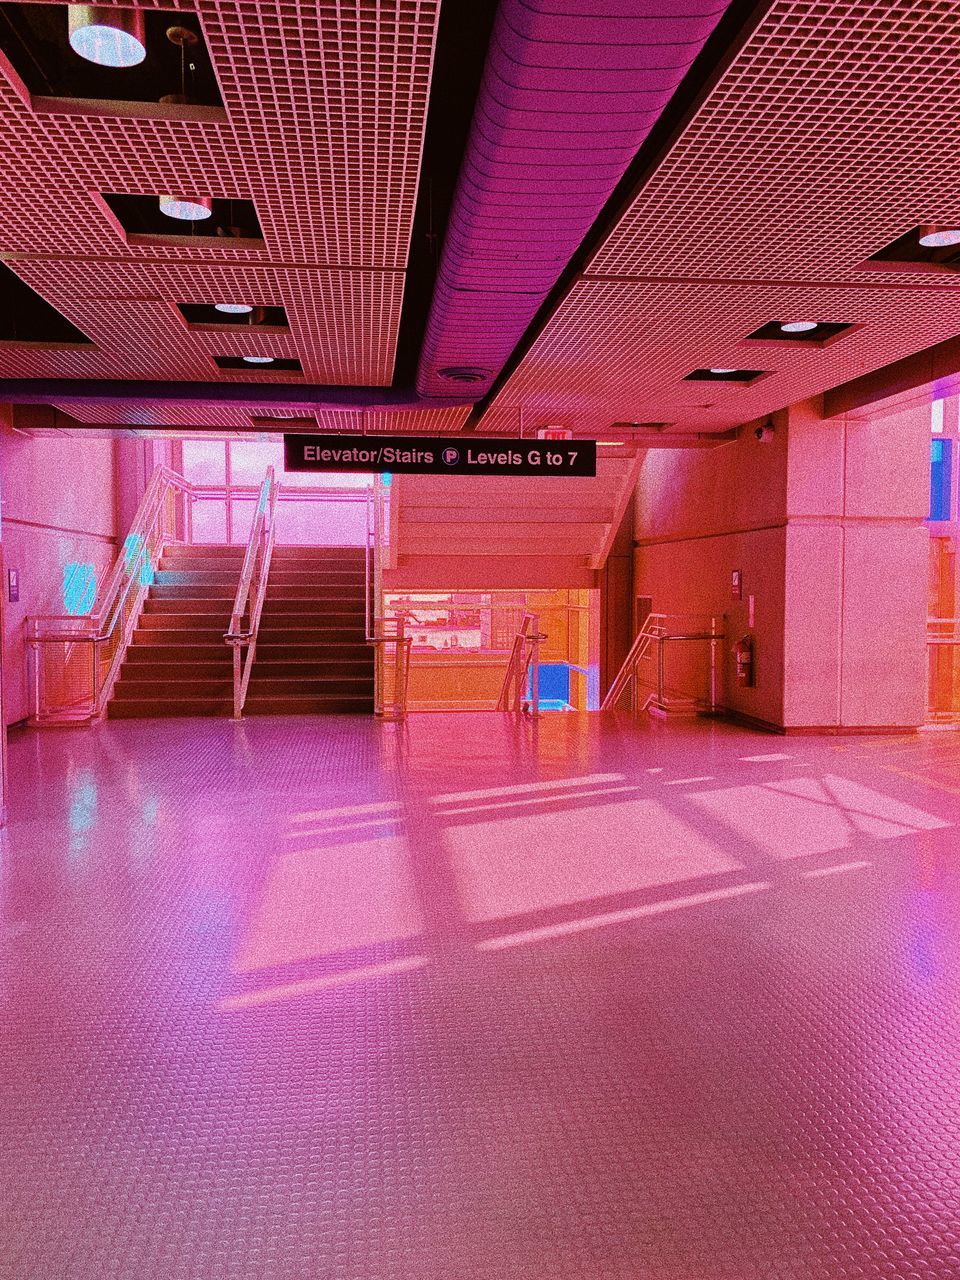 indoors, architecture, illuminated, no people, ceiling, pink color, transportation, lighting equipment, empty, built structure, absence, flooring, purple, modern, communication, reflection, sign, seat, mode of transportation, electric light, parking garage